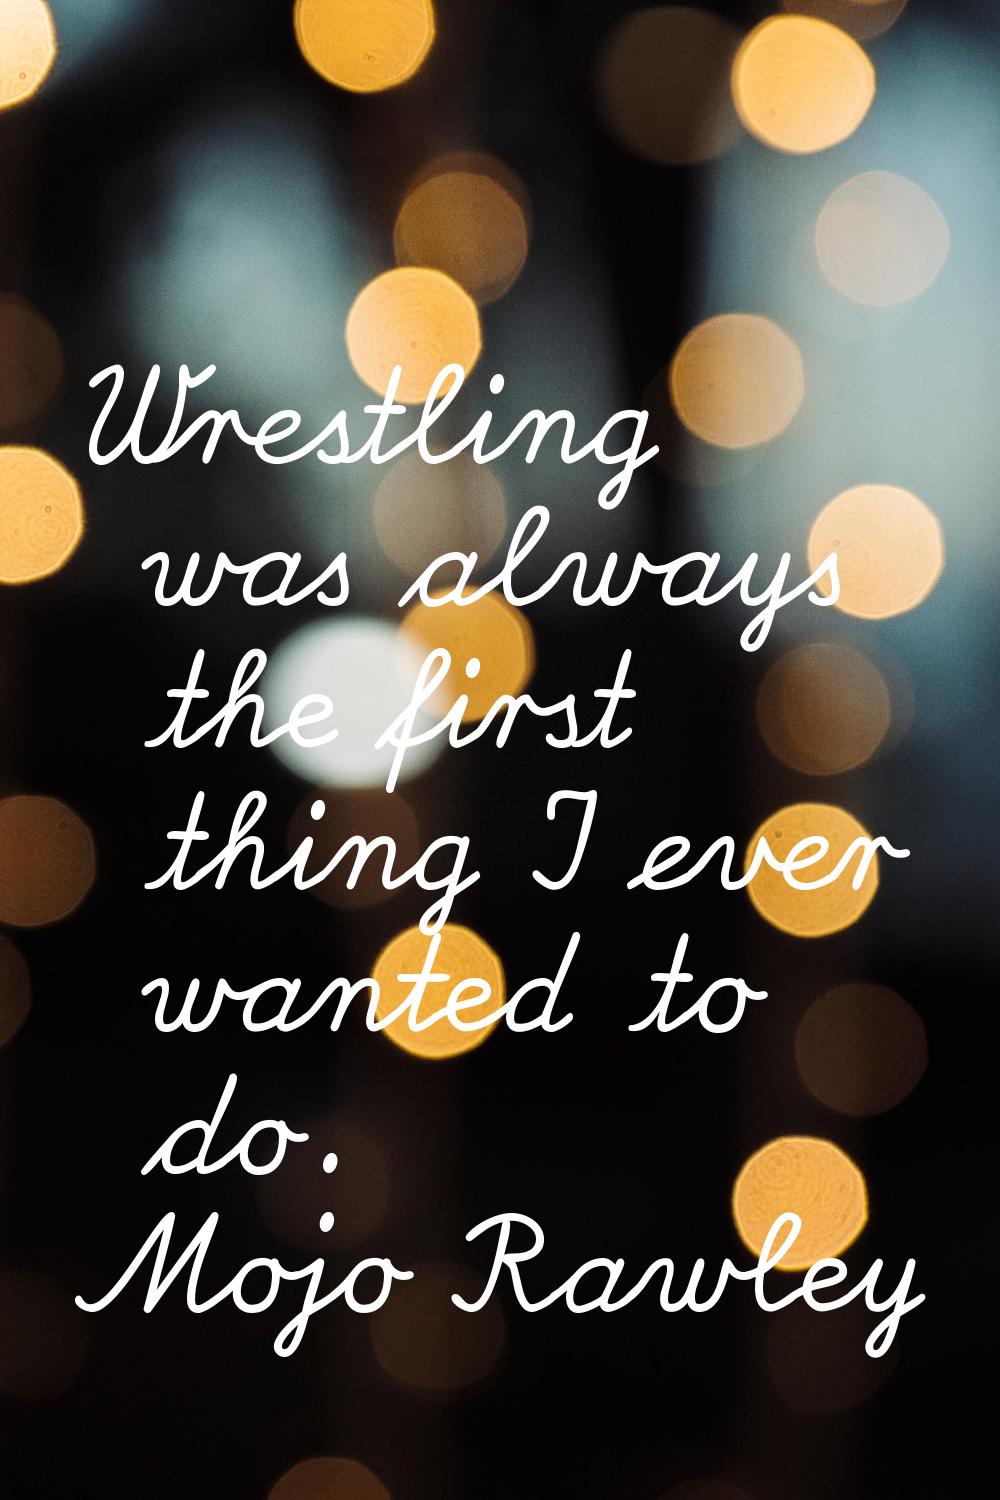 Wrestling was always the first thing I ever wanted to do.